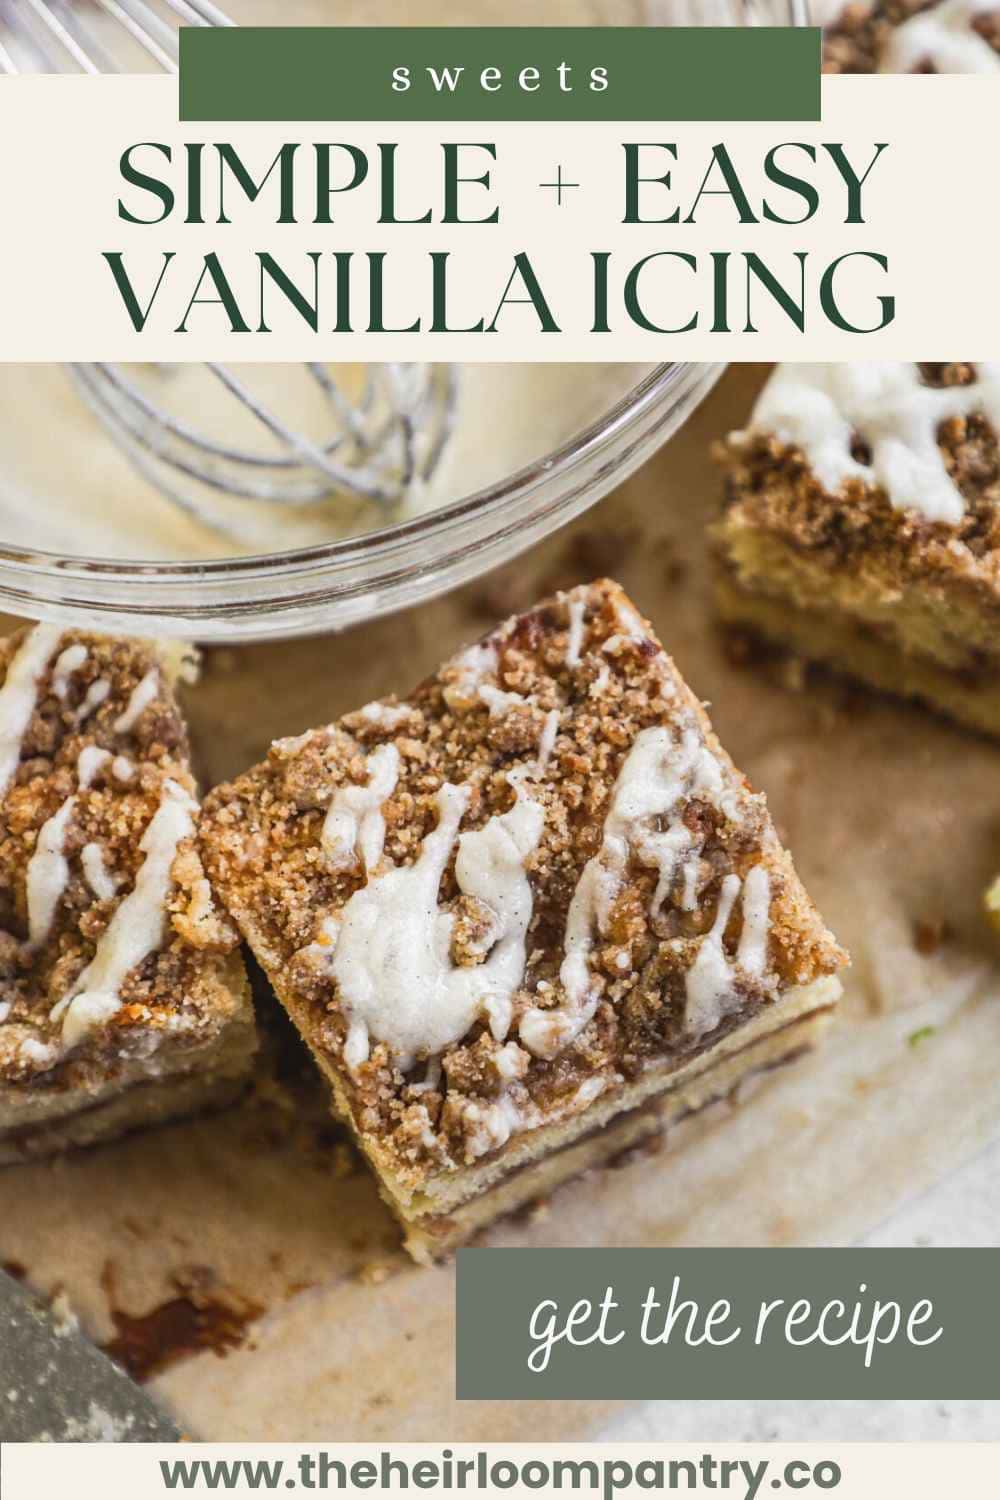 Simple and easy vanilla icing for cakes, scones, cinnamon rolls, and more Pinterest pin.